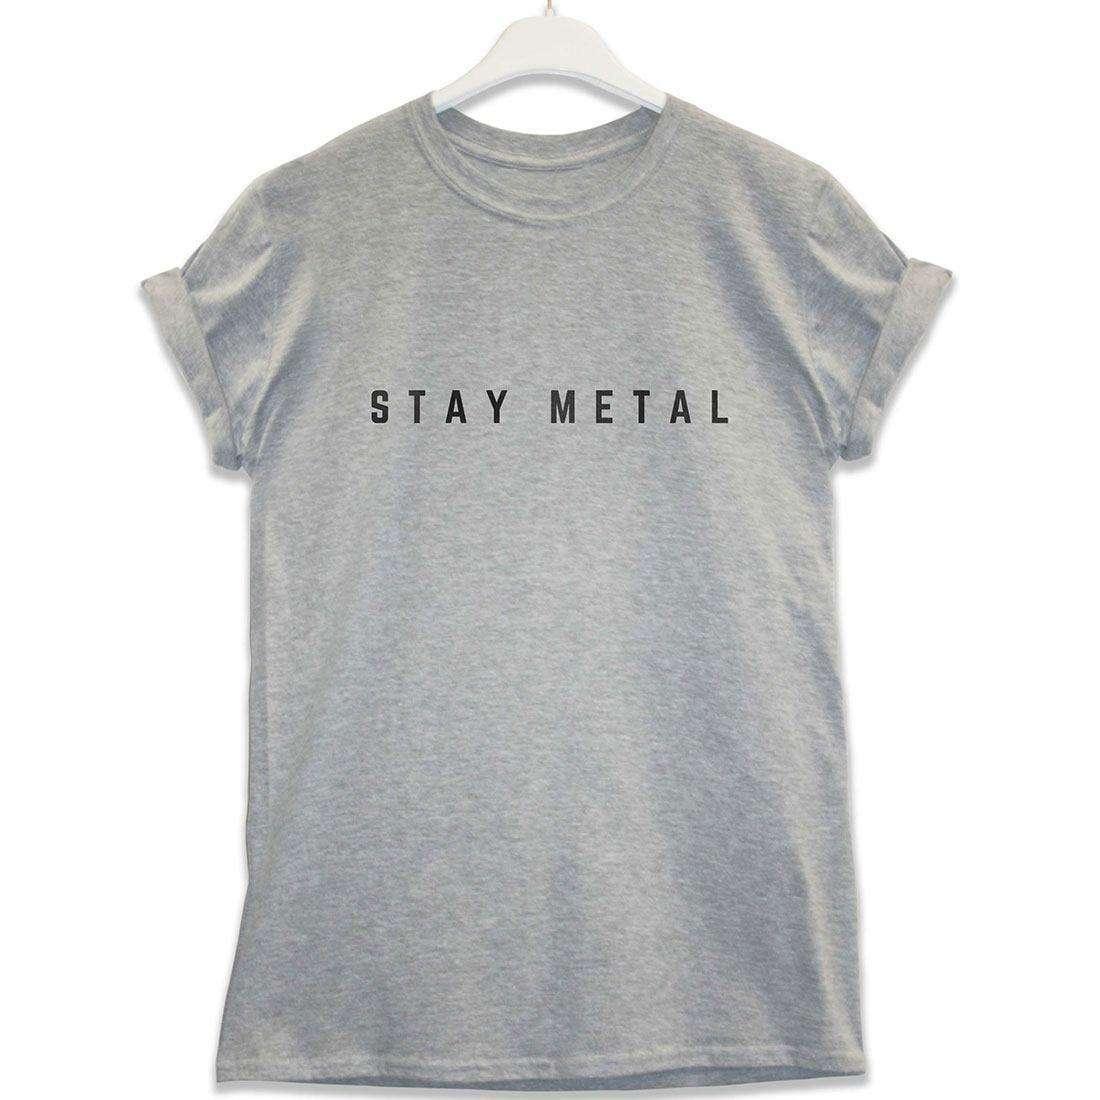 Stay Metal Unisex T-Shirt For Men And Women 8Ball